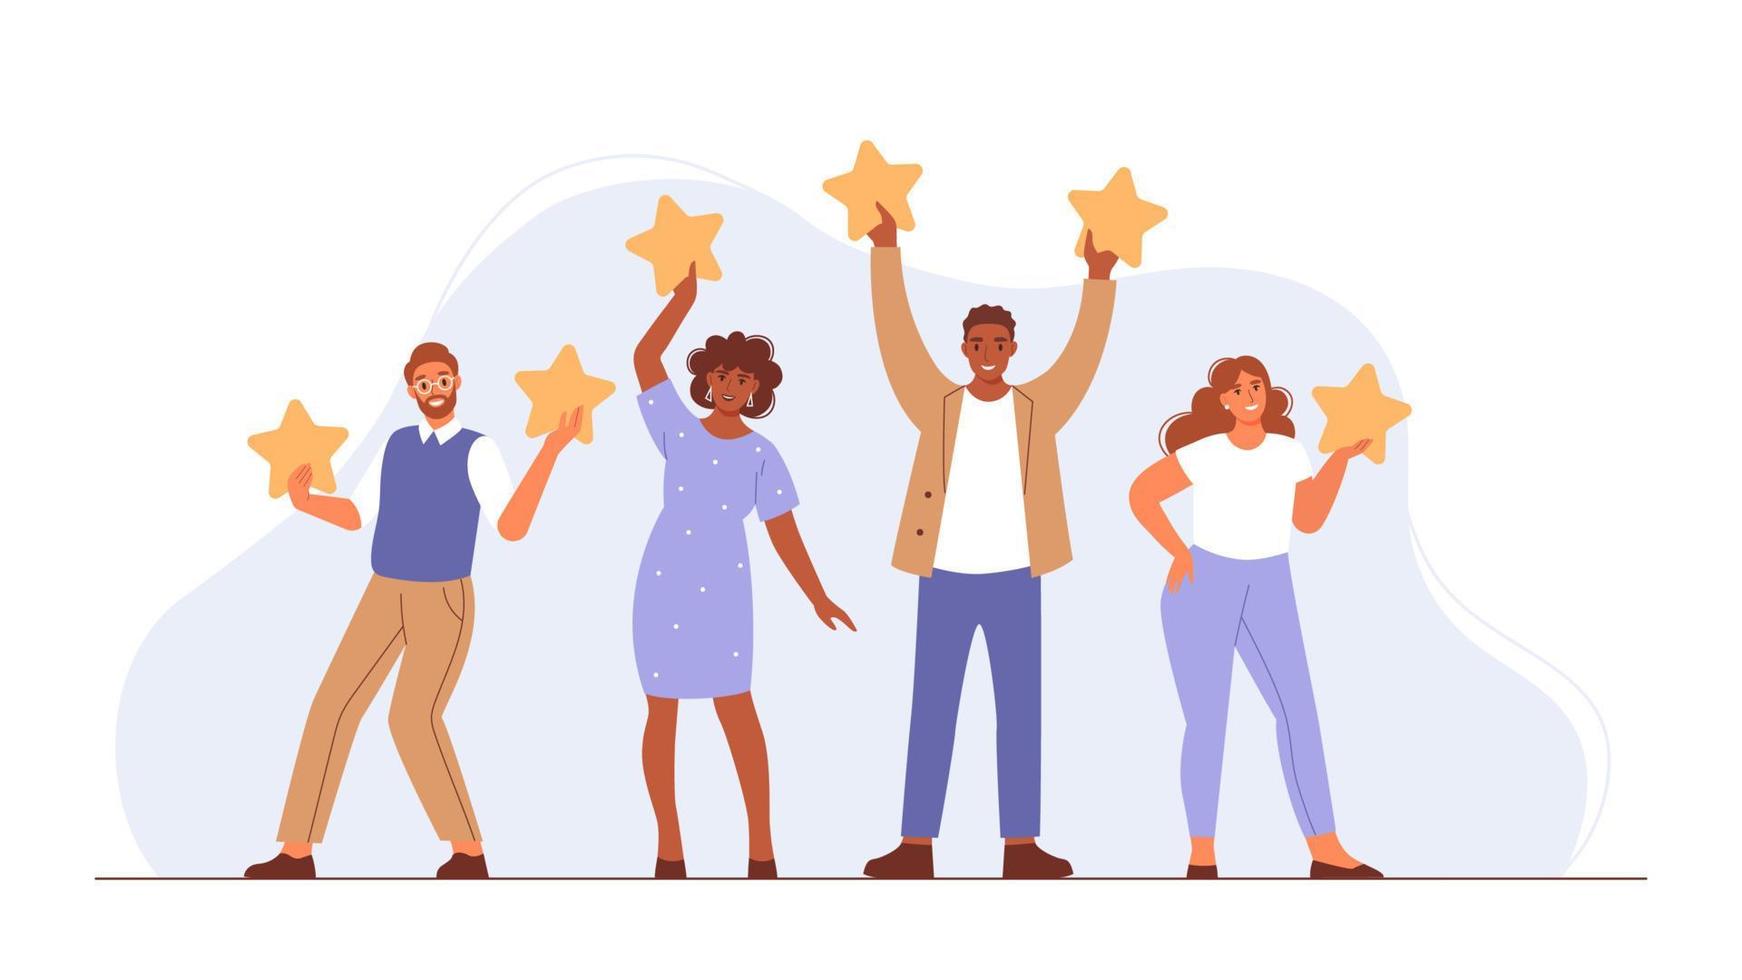 People are holding stars. Clients evaluating product, service. Feedback concept. Flat vector illustration.